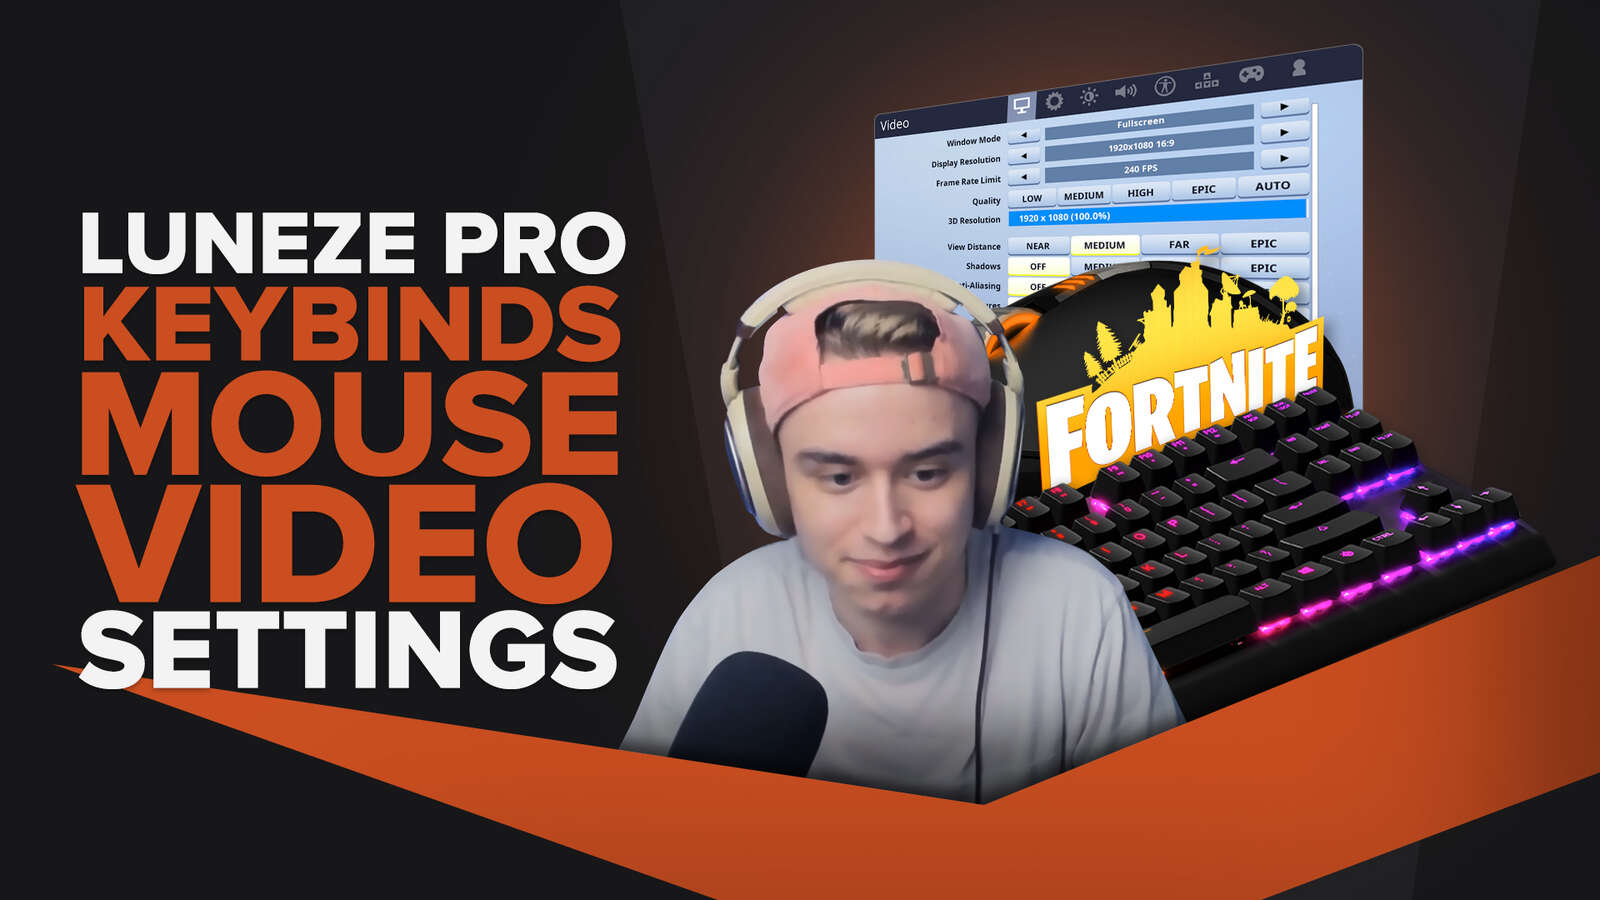 Luneze's | Keybinds, Mouse, Video Pro Fornite Settings